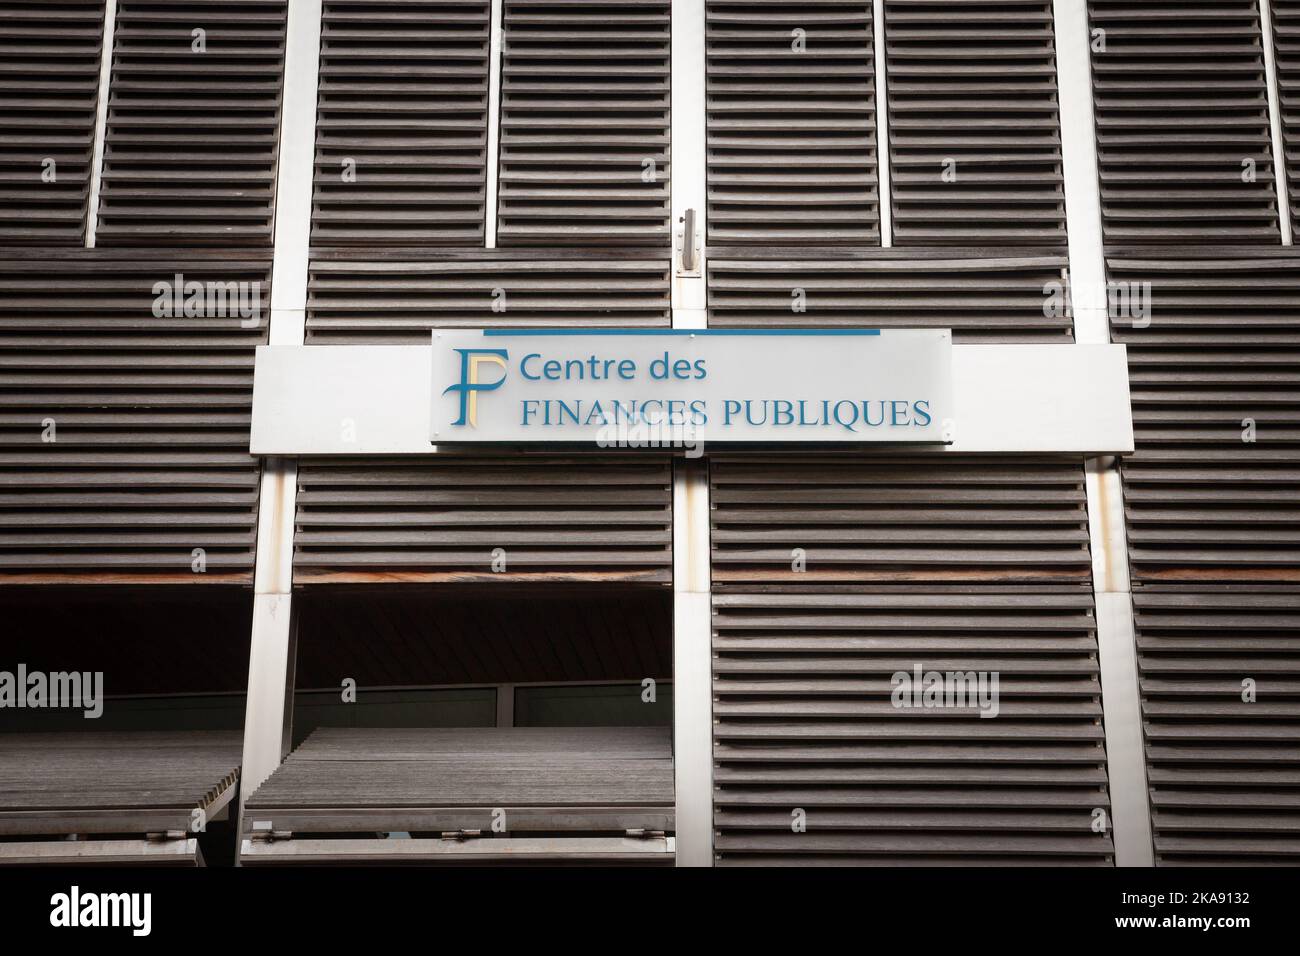 LYON, FRANCE - JULY 17, 2019: e  Picture of the local office of Direction Generale des Finances Publiques with their logo. The Directorate General of Stock Photo